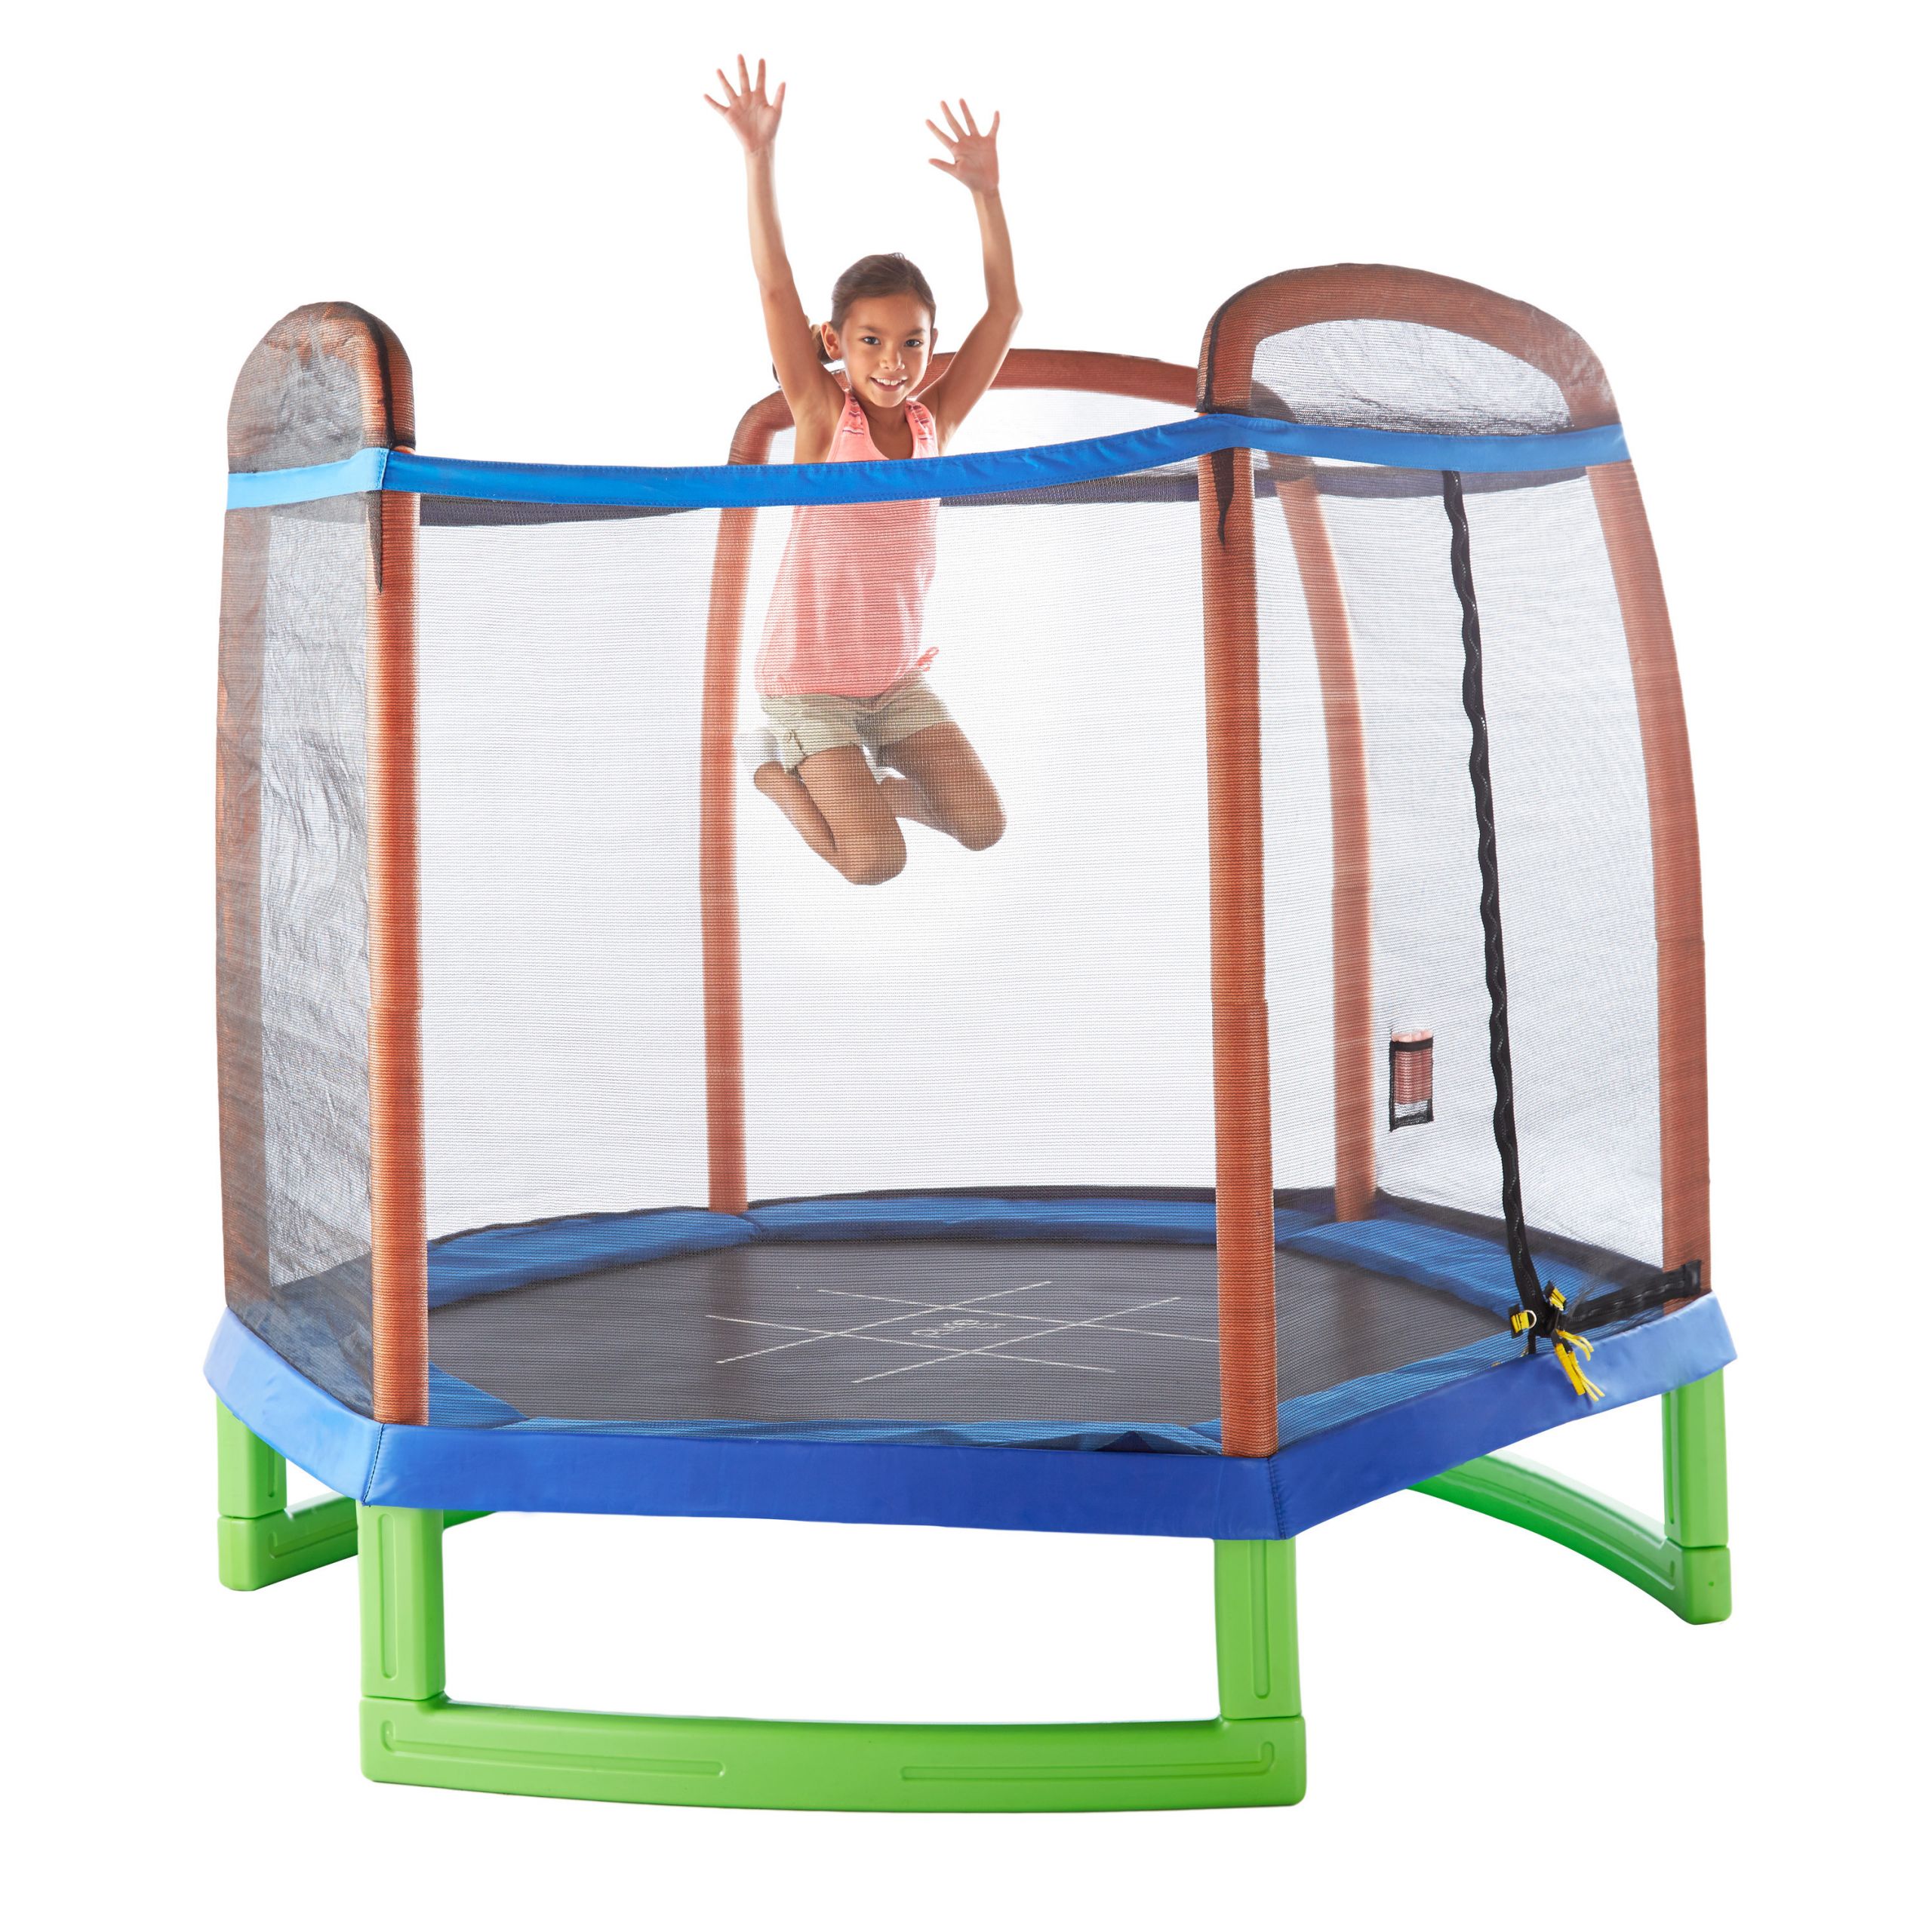 Outdoor Trampoline For Kids
 Pure Fun 7ft Kids Trampoline with Enclosure TicTacToe